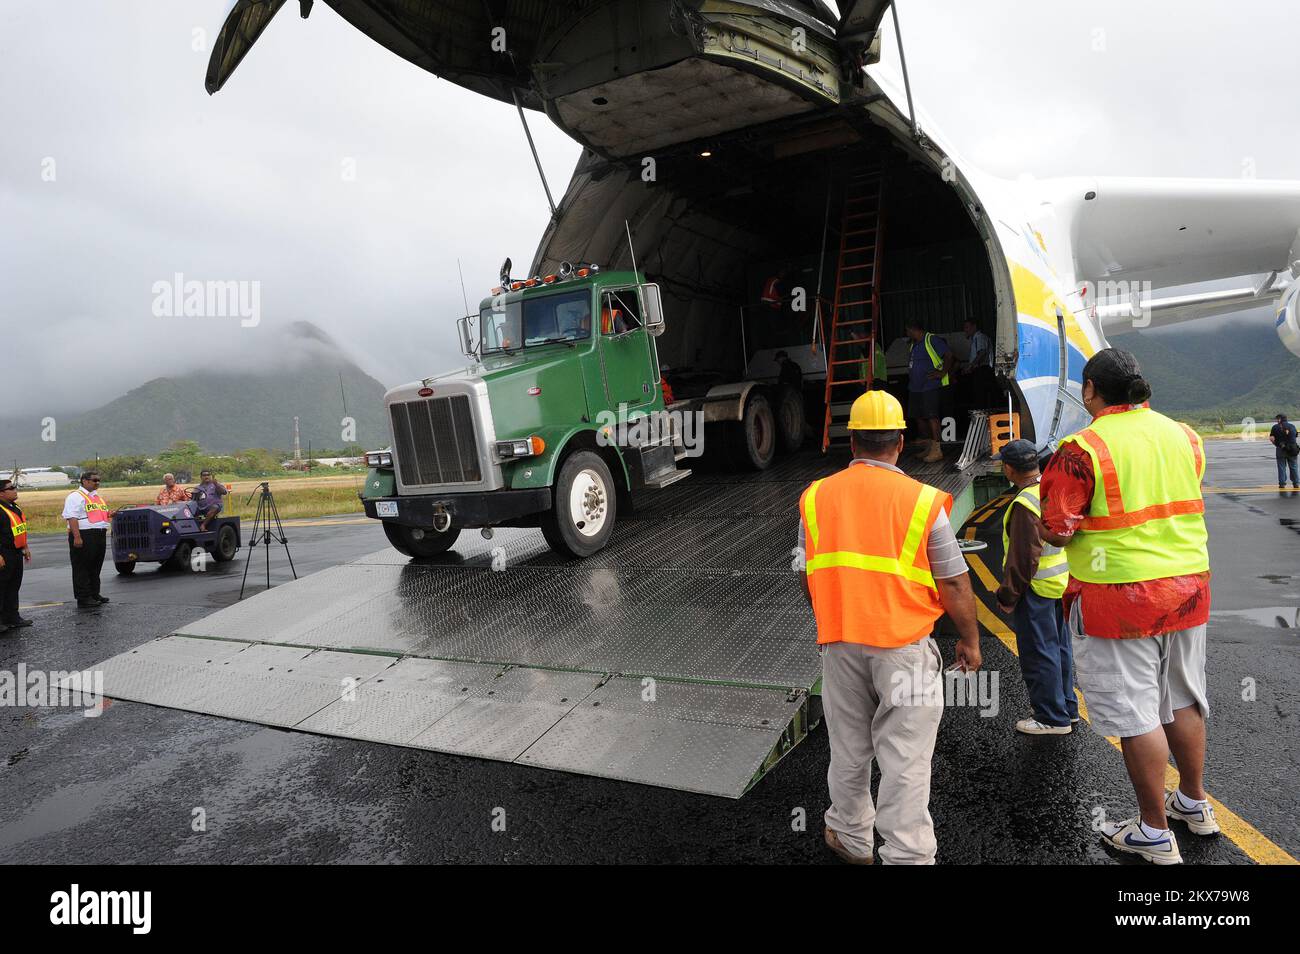 Generators Rolling Off Of Antonov Cargo Plane in American Samoa. American Samoa Earthquake, Tsunami, and Flooding. Photographs Relating to Disasters and Emergency Management Programs, Activities, and Officials Stock Photo